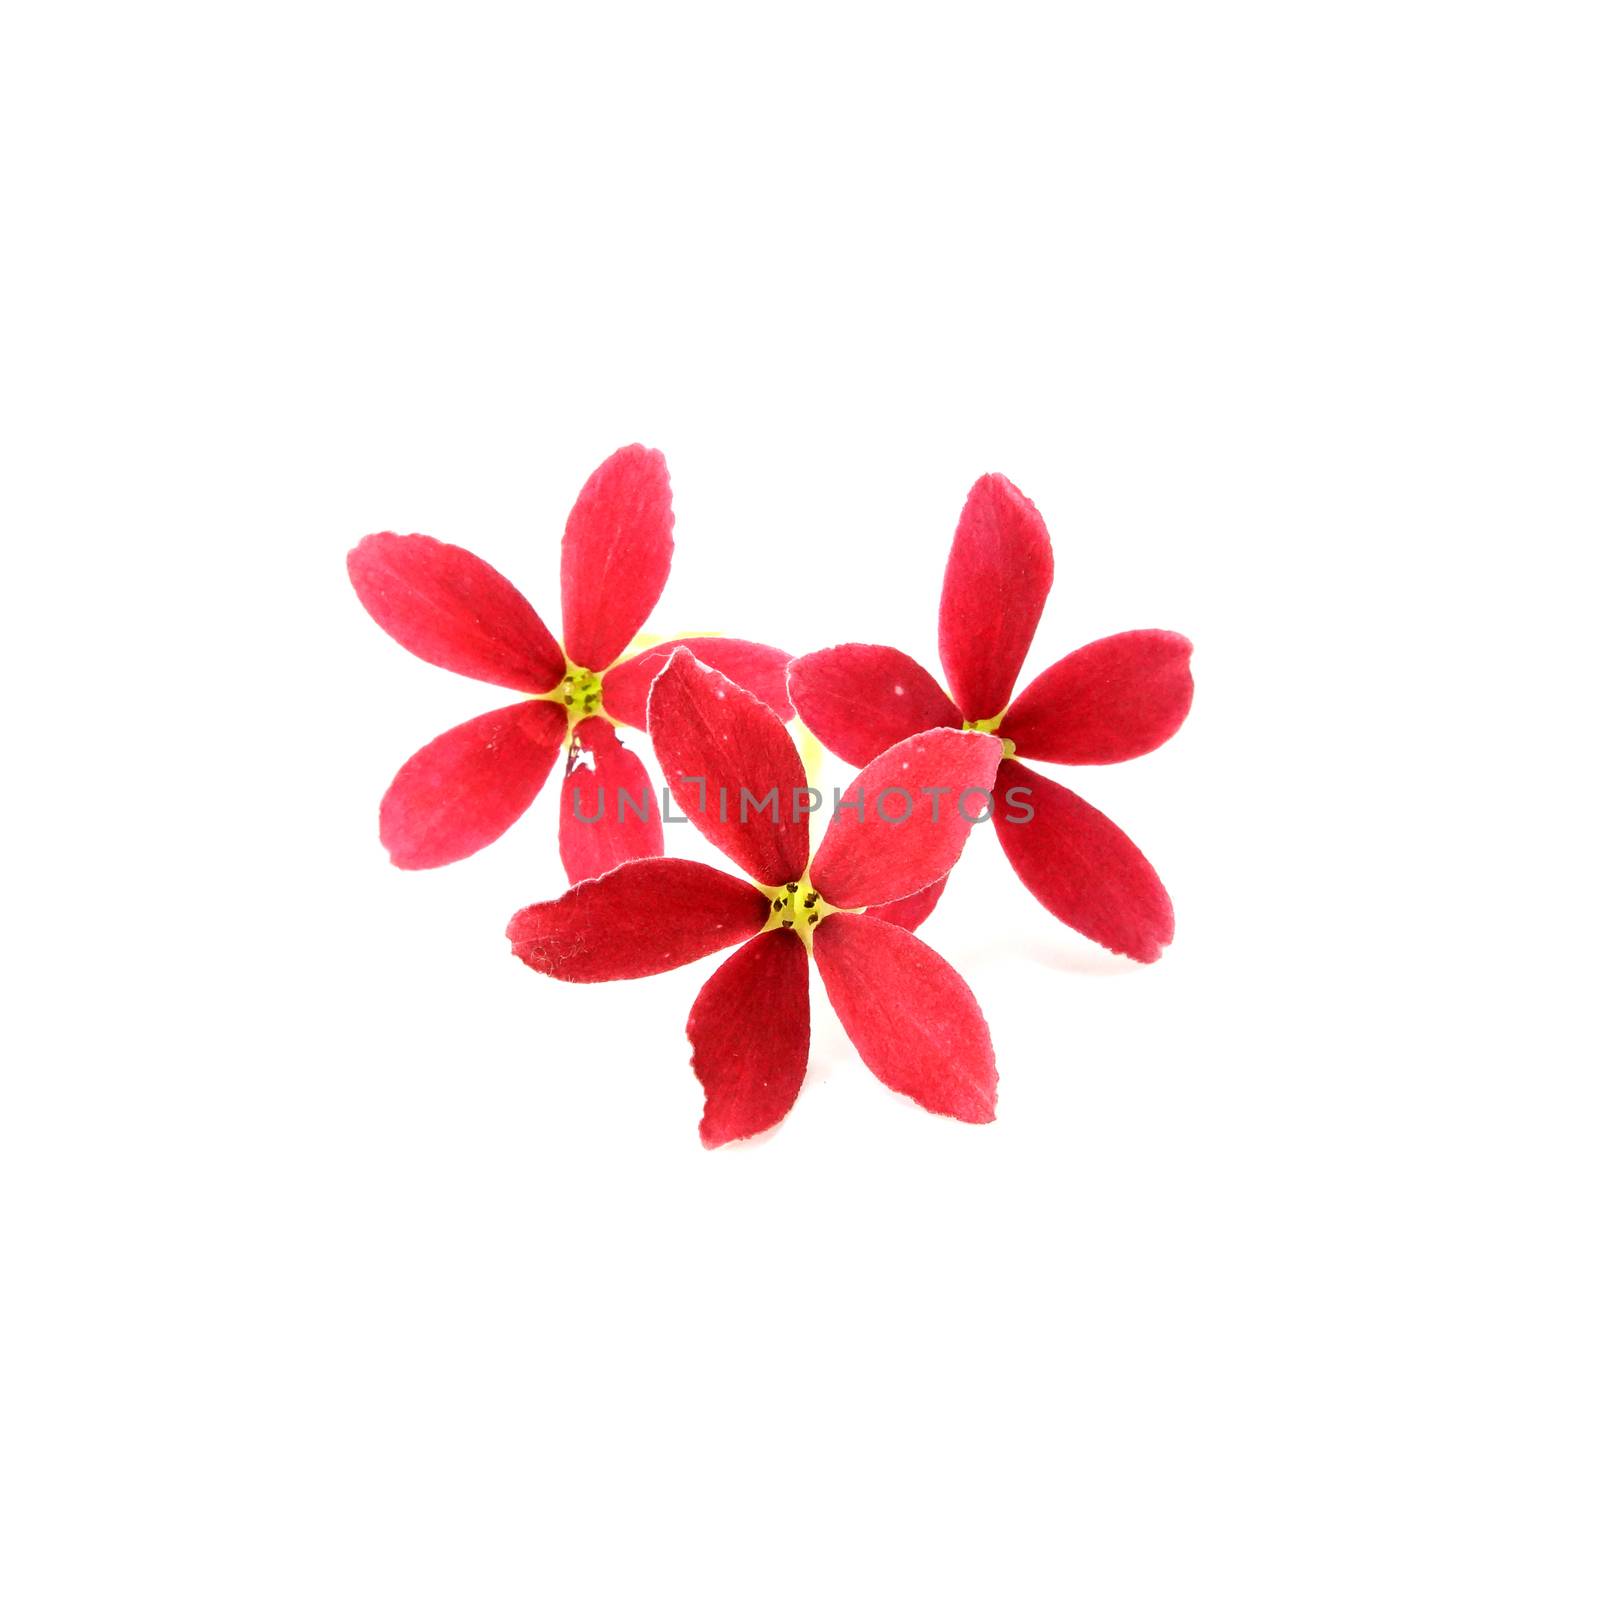 Red flower of Rangoon creeper on white background.